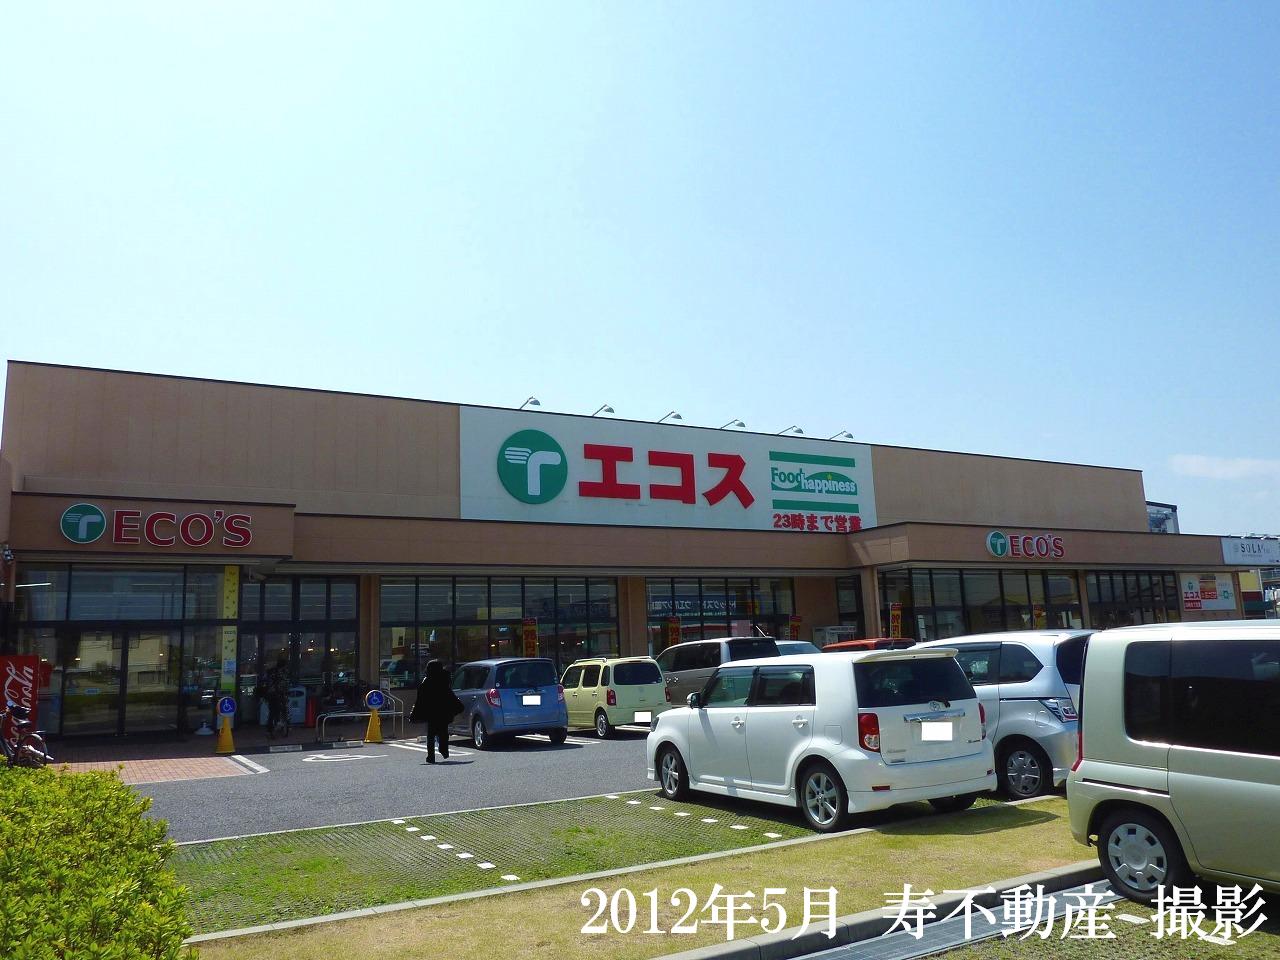 Supermarket. Ecos Food Happiness Kitamoto SC store up to (super) 811m